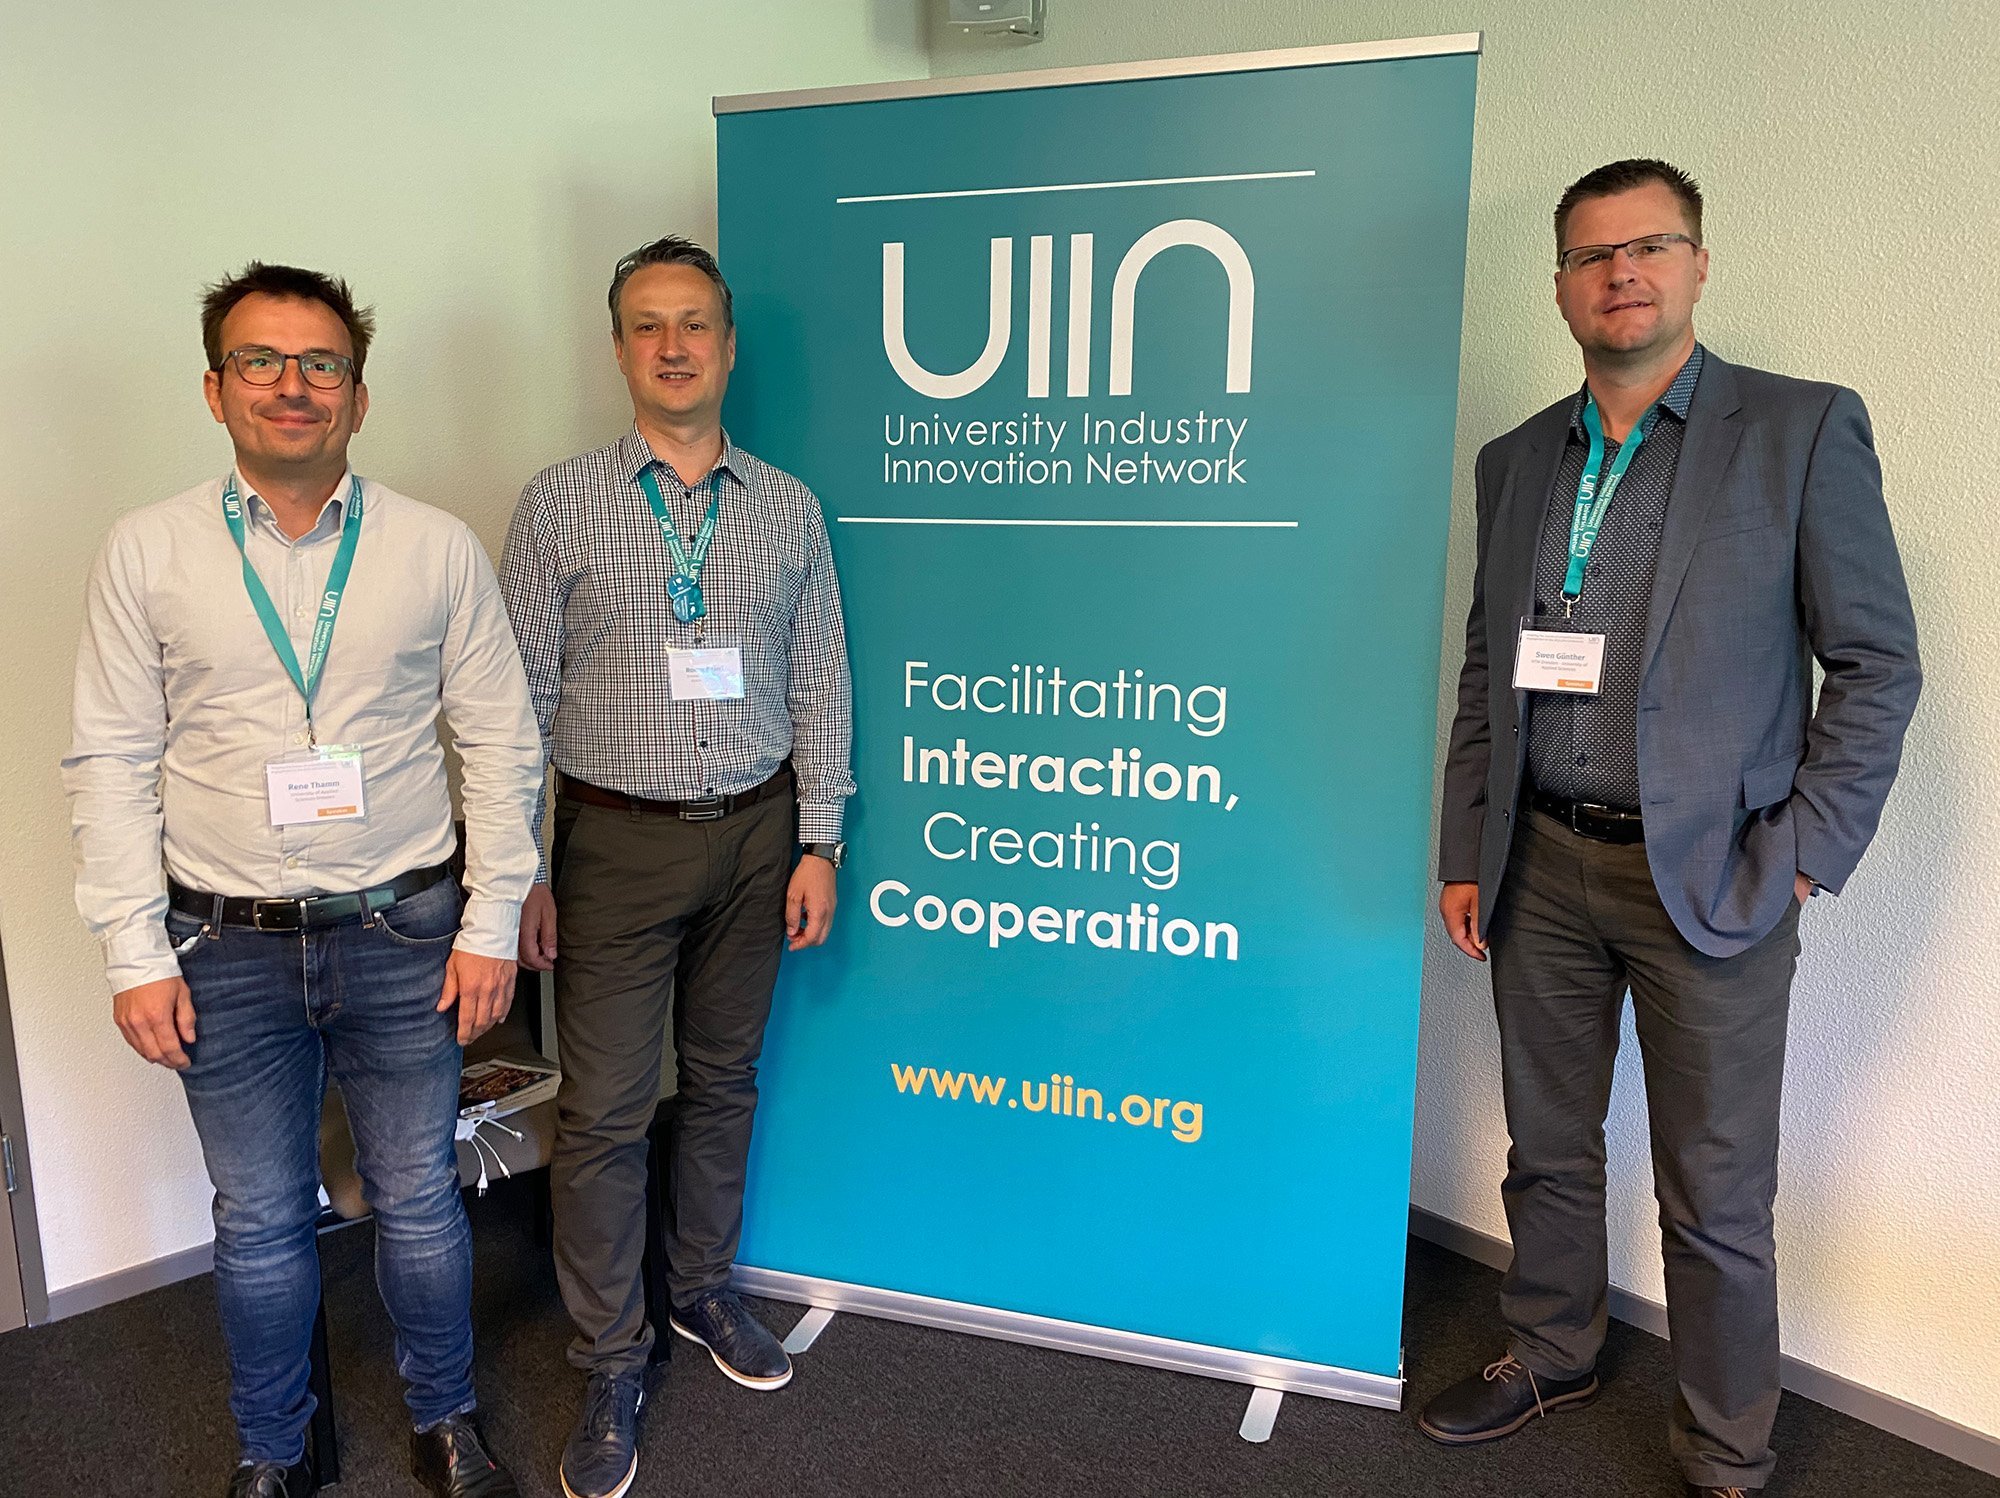 Prof. René Thamm, Prof. Ronny Baierl and Prof. Swen Günther at the UIIN Conference in Amsterdam